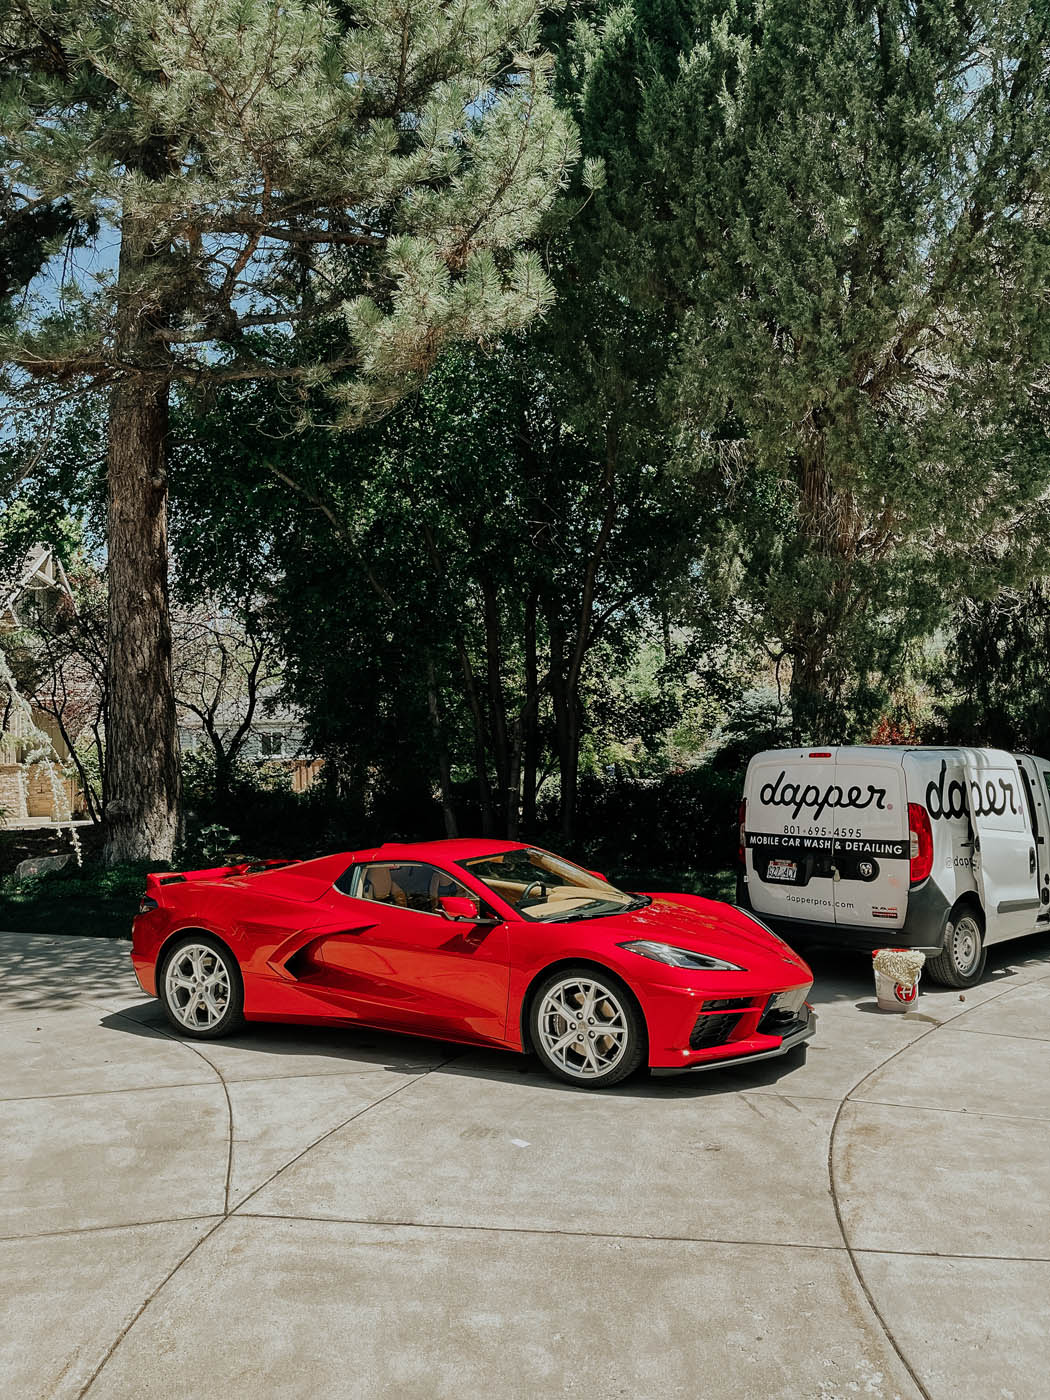 A red corvette parked next to a Dapper Pros cleaning van.